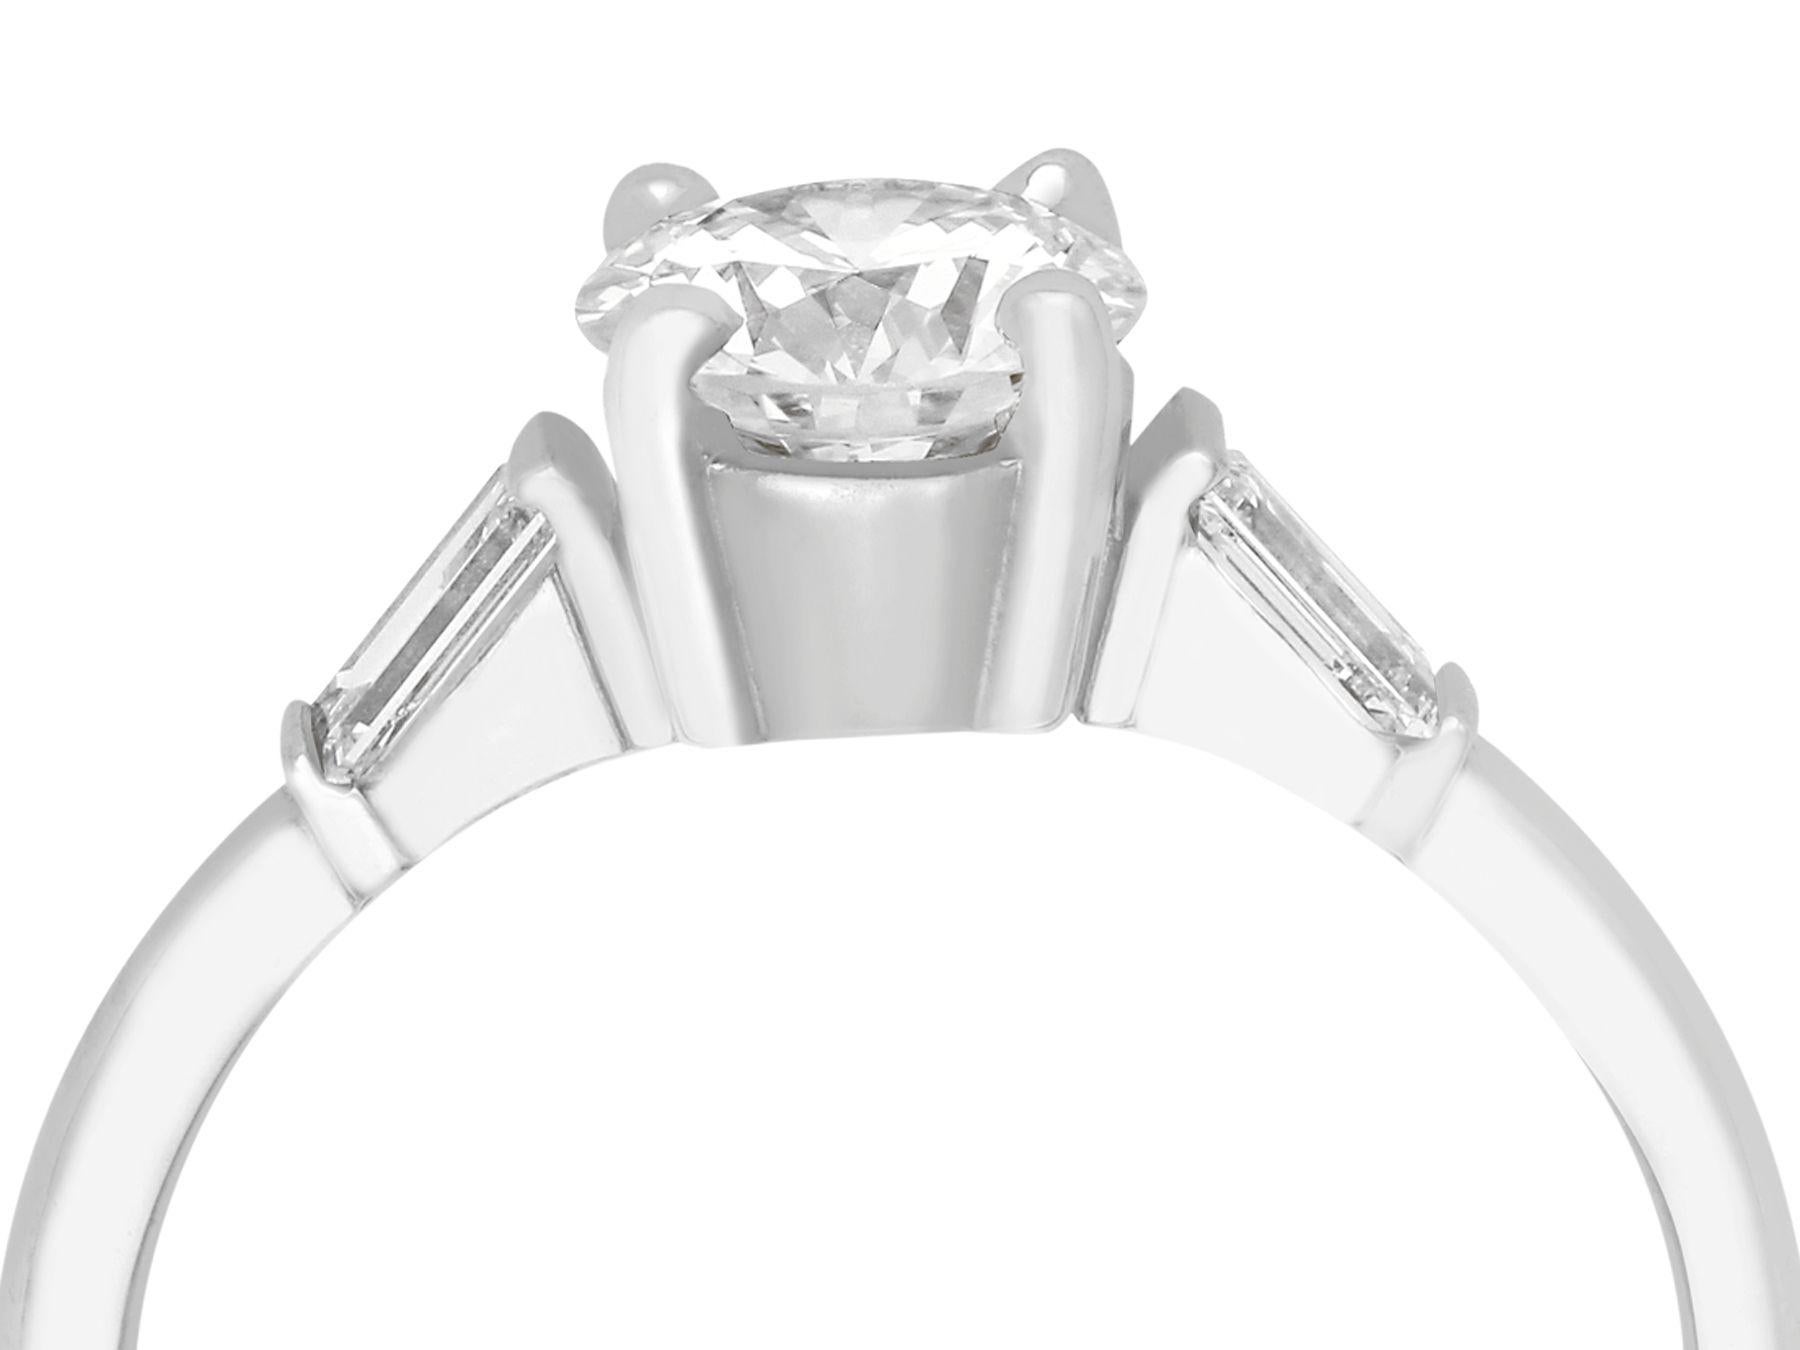 An impressive 1.38 carat (total) modern brilliant round cut diamond and platinum Art Deco style solitaire ring; part of our diverse range of diamond jewellery

This fine and impressive contemporary Art Deco style diamond solitaire ring has been